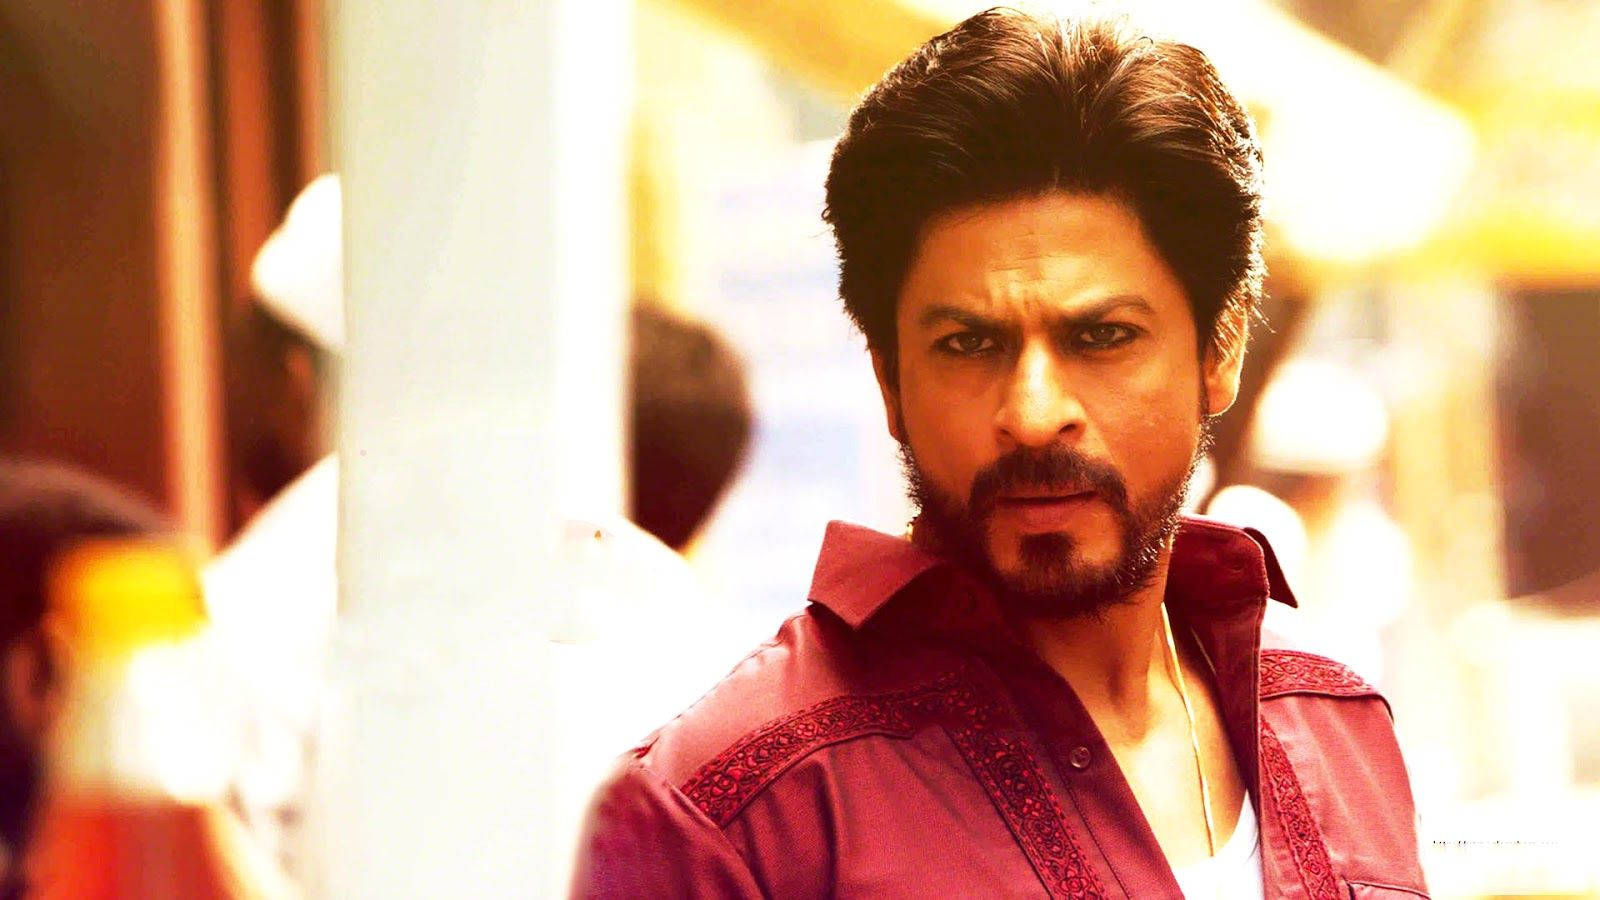 Does Shah Rukh Khan's new Raees poster remind you of this iconic Amitabh  Bachchan movie still? - Bollywood News & Gossip, Movie Reviews, Trailers &  Videos at Bollywoodlife.com